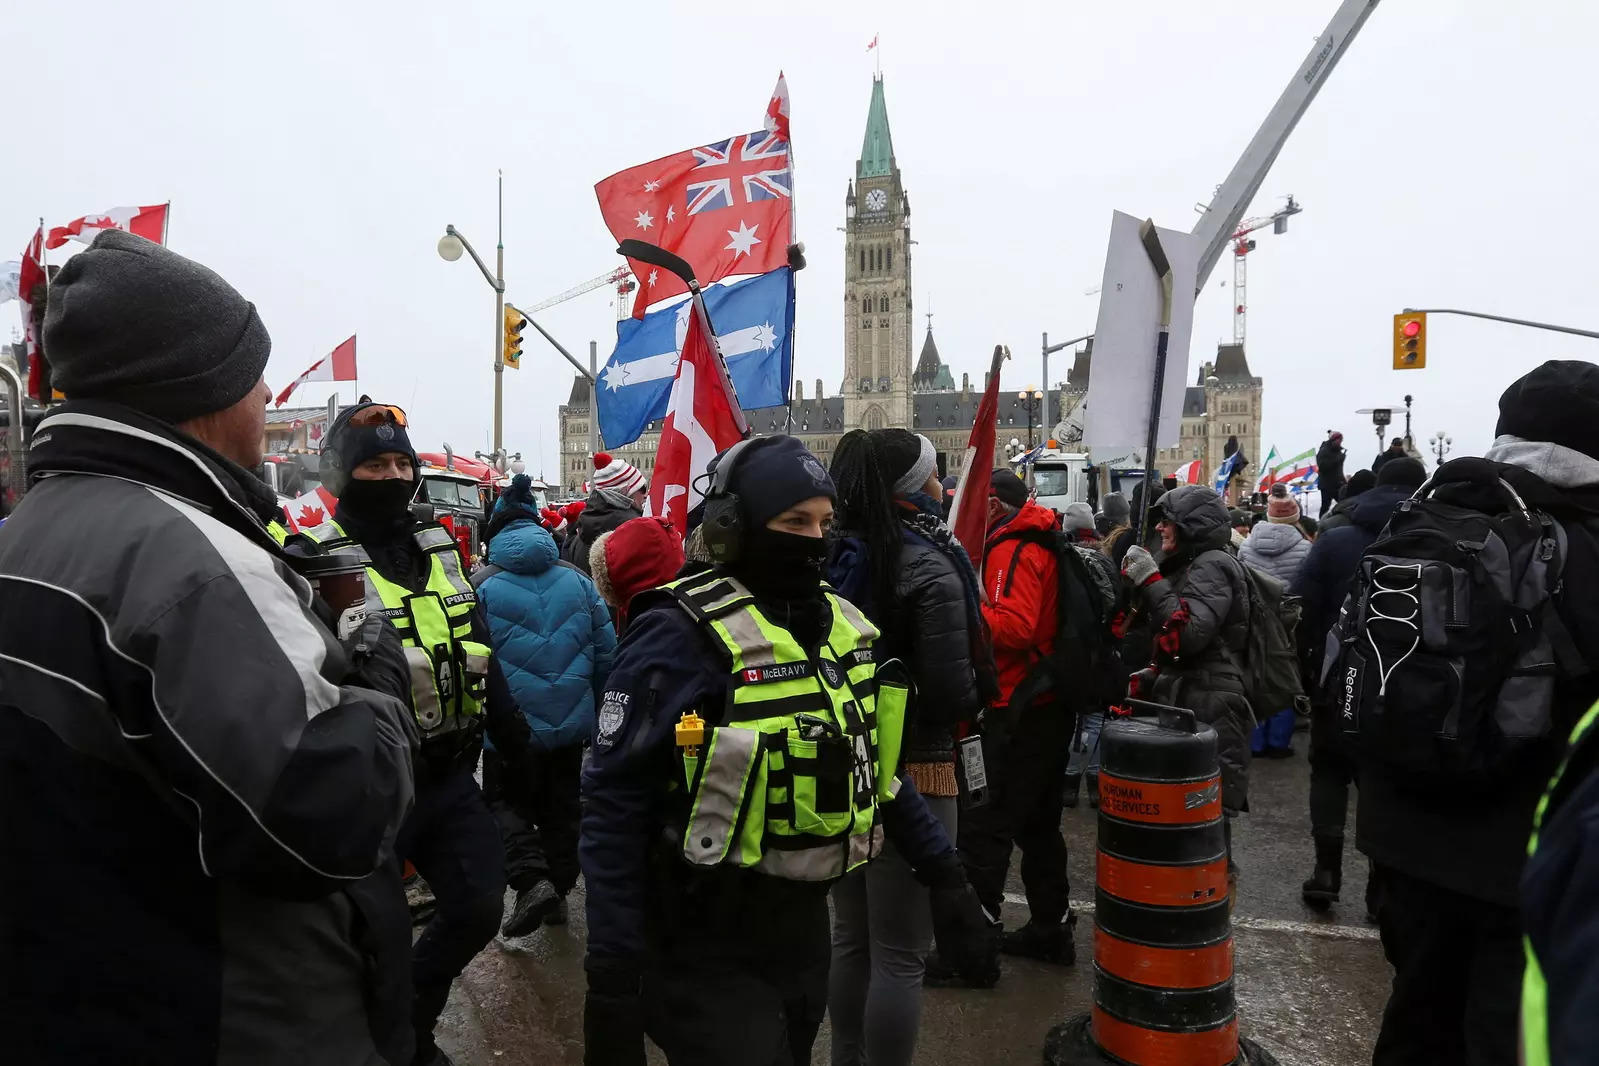 Police officers walk through protest crowd in front of the Parliament Hill, as truckers and supporters continue to protest coronavirus disease (Covid-19) vaccine mandates, in Ottawa, Ontario, Canada.